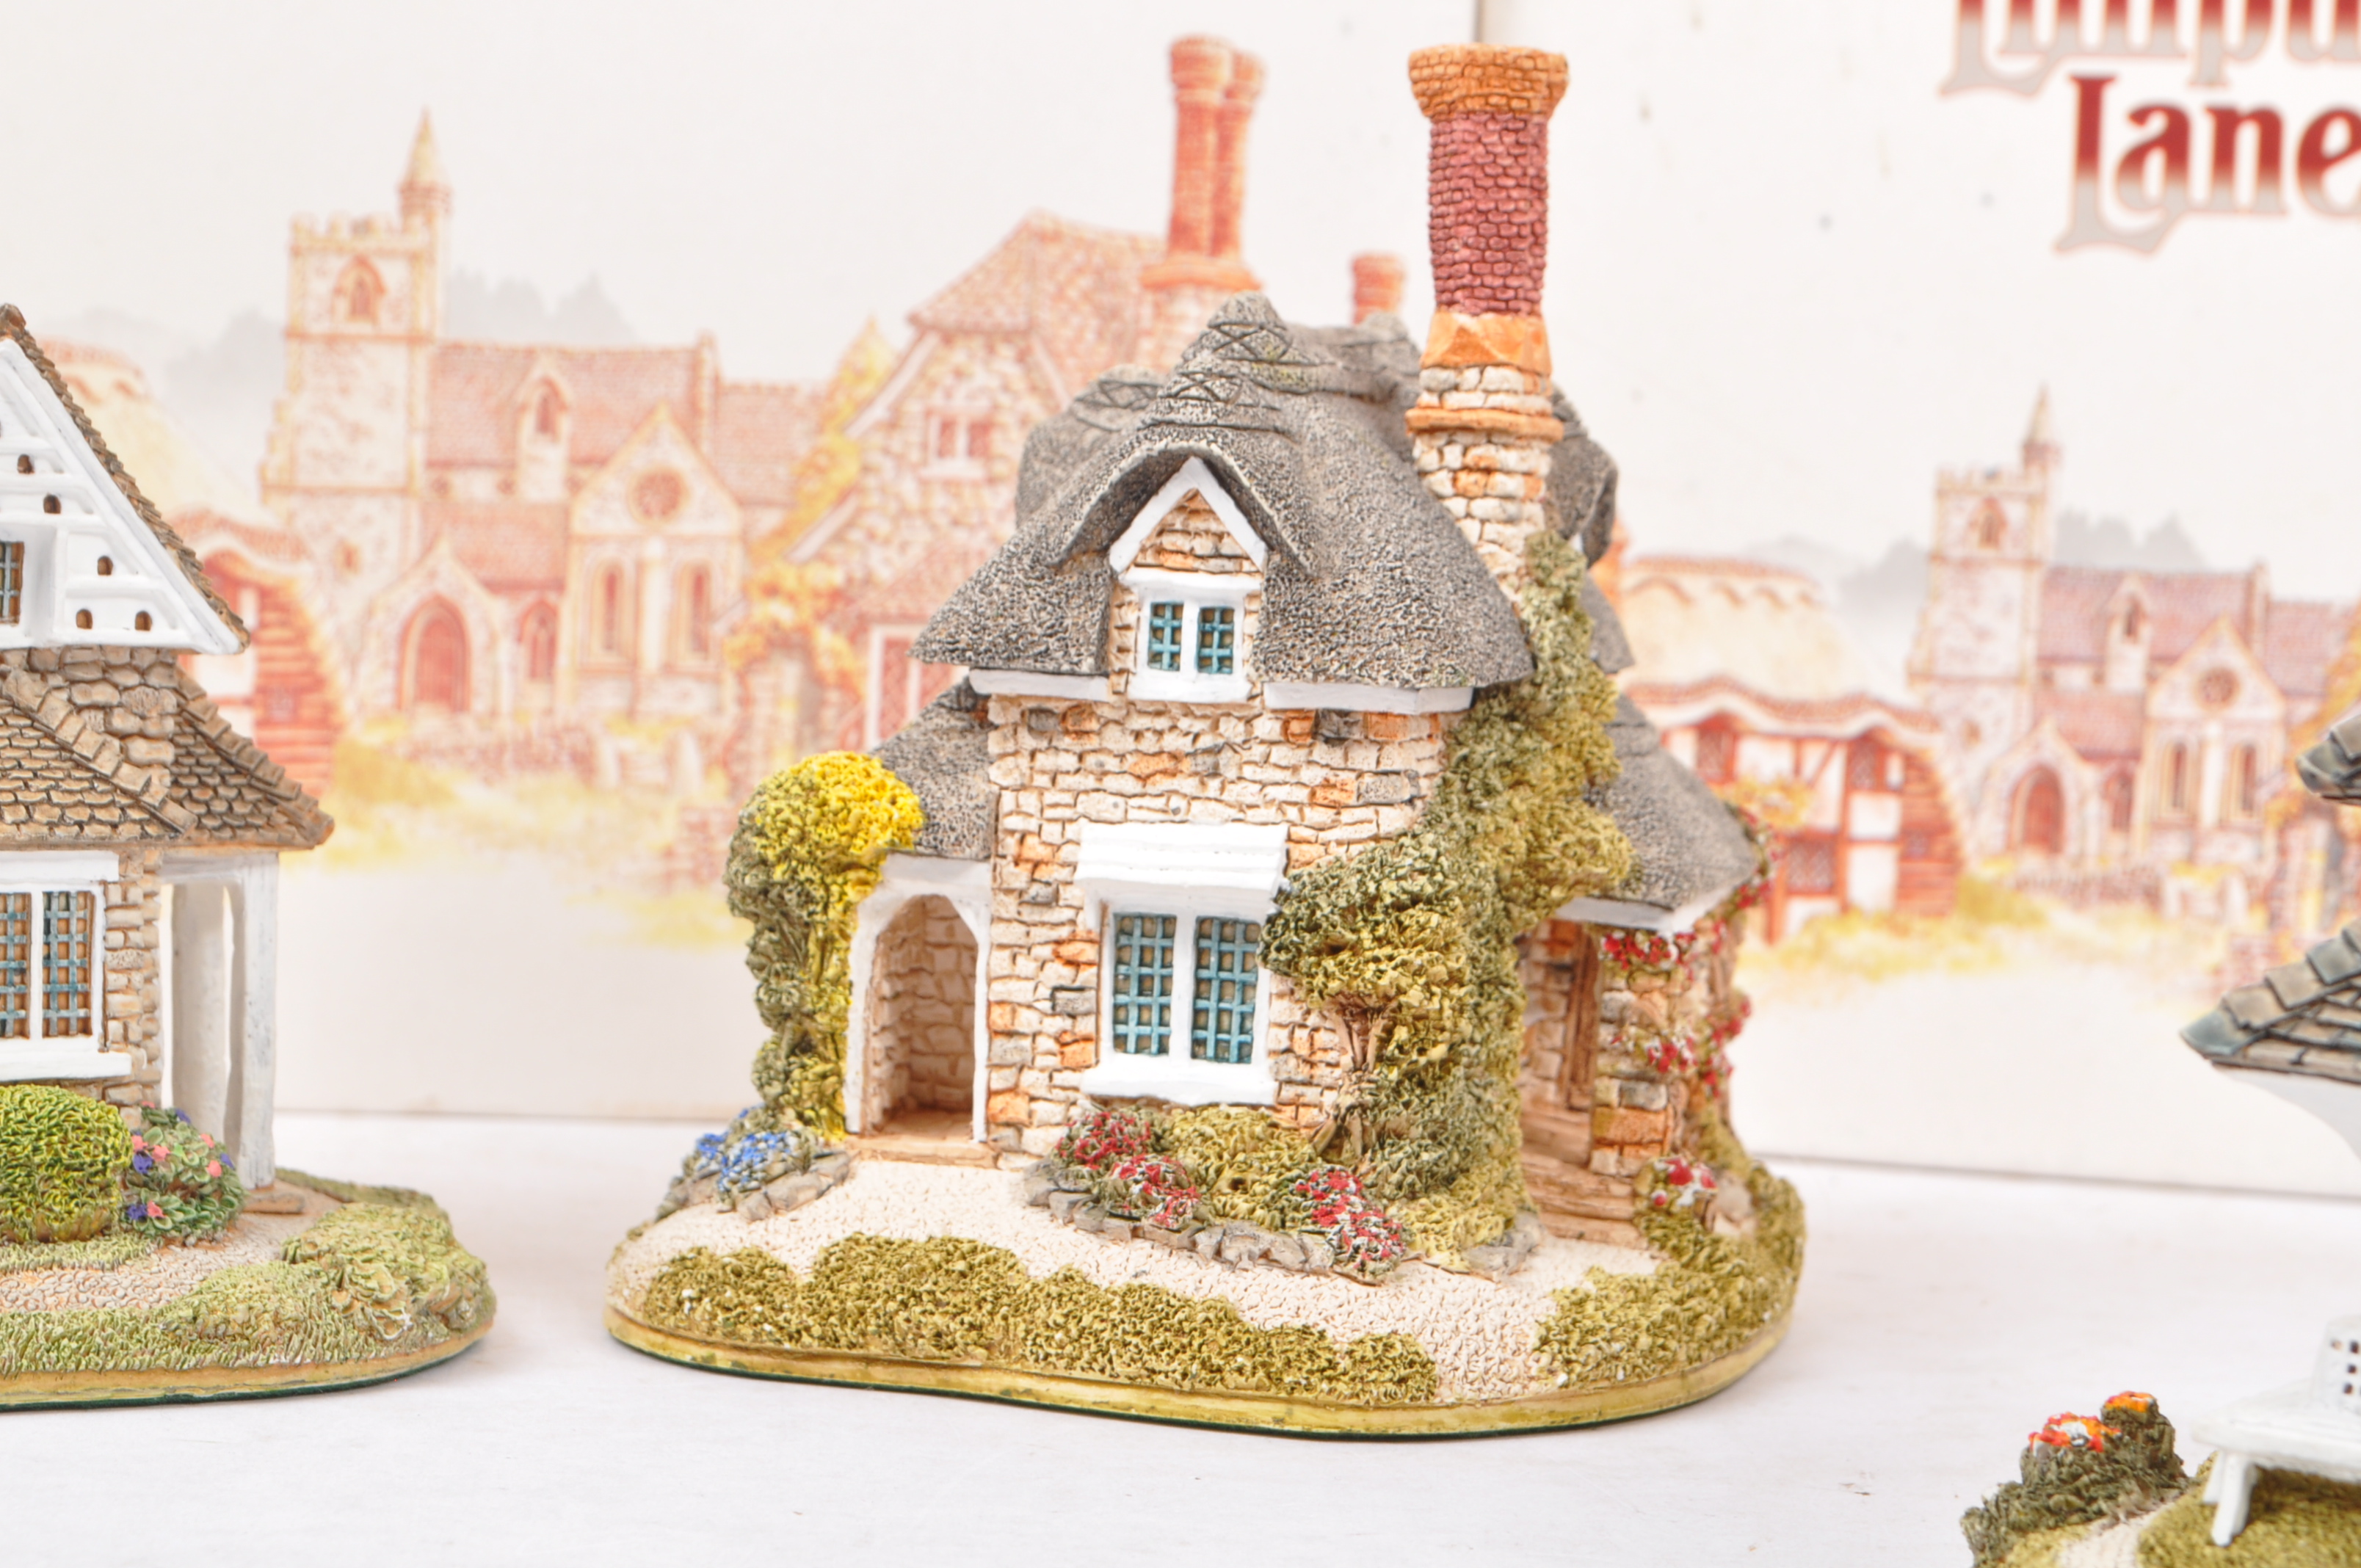 LILLIPUT LANE - COLLECTION OF HOUSE / COTTAGE RESIN FIGURINES - Image 5 of 9